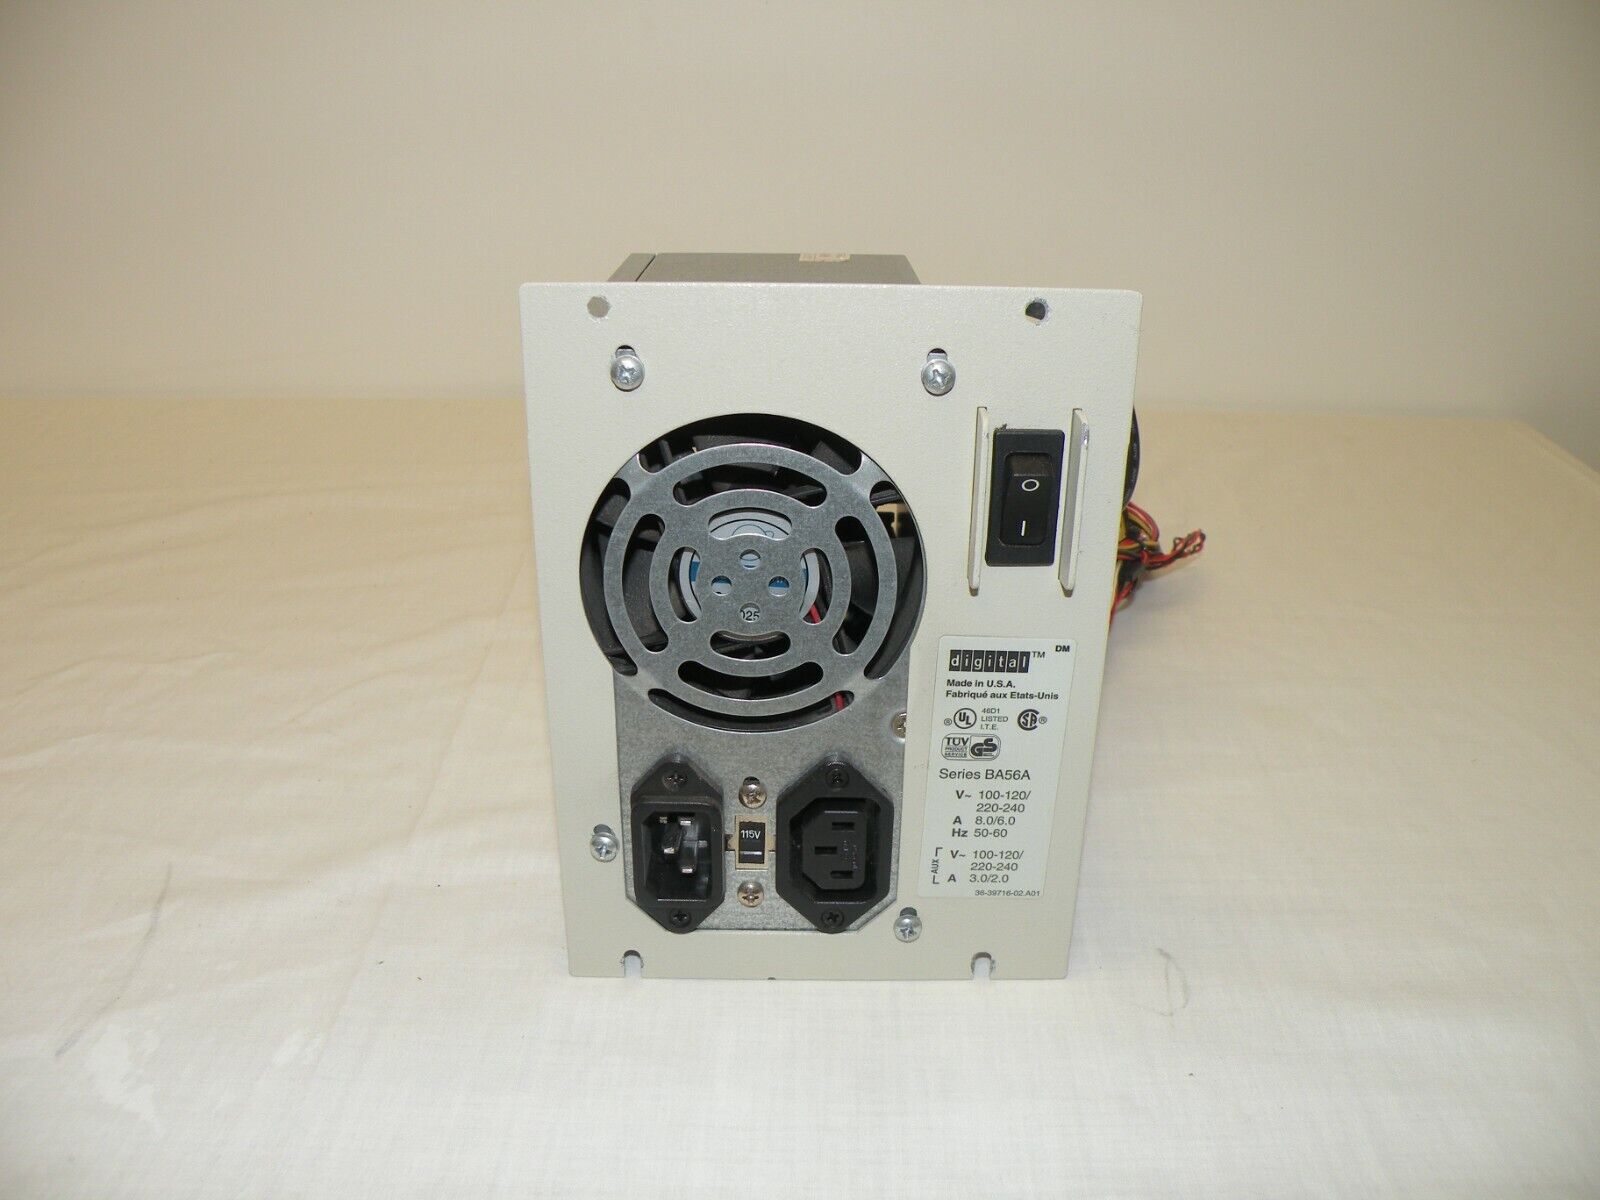 DEC BA56A 300W SWITCHING PSU FOR INFOSERVER 1000 TOWER OEM AUSTIN MODEL LC-200C